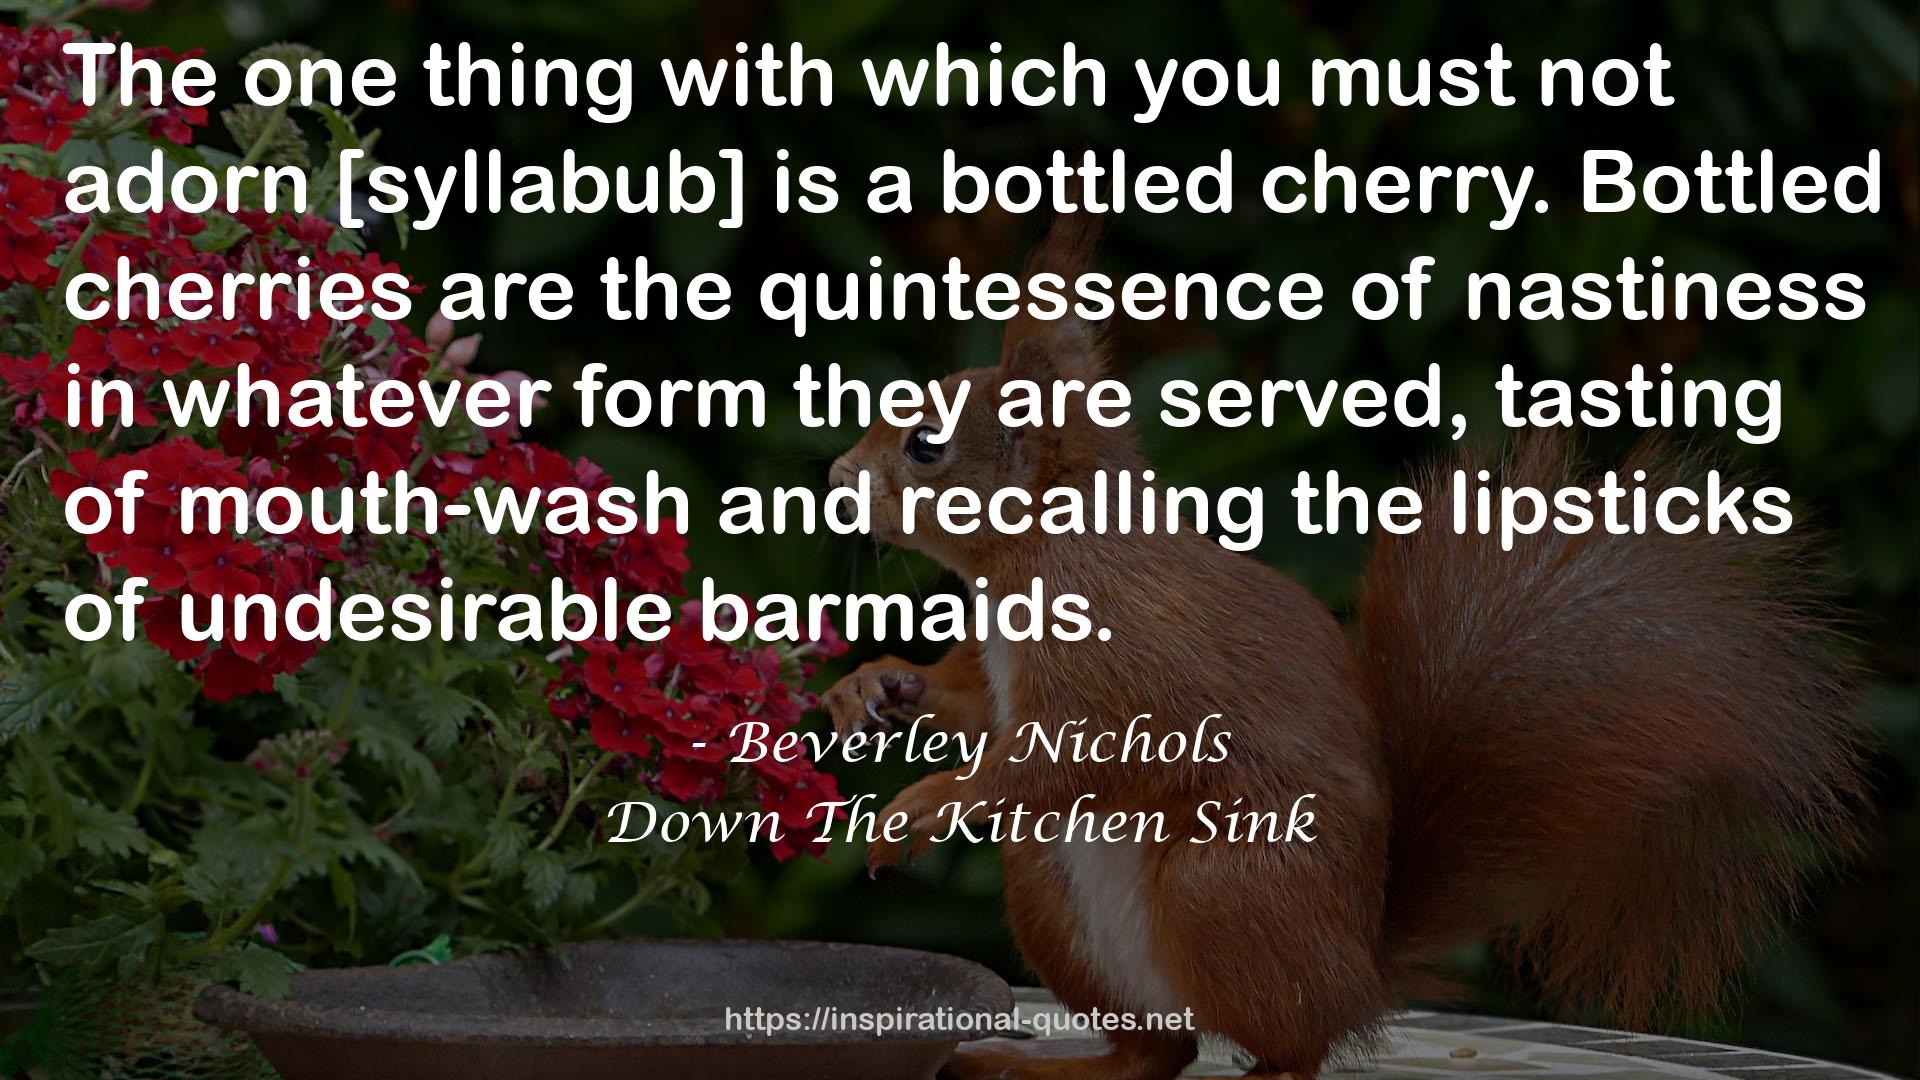 Down The Kitchen Sink QUOTES